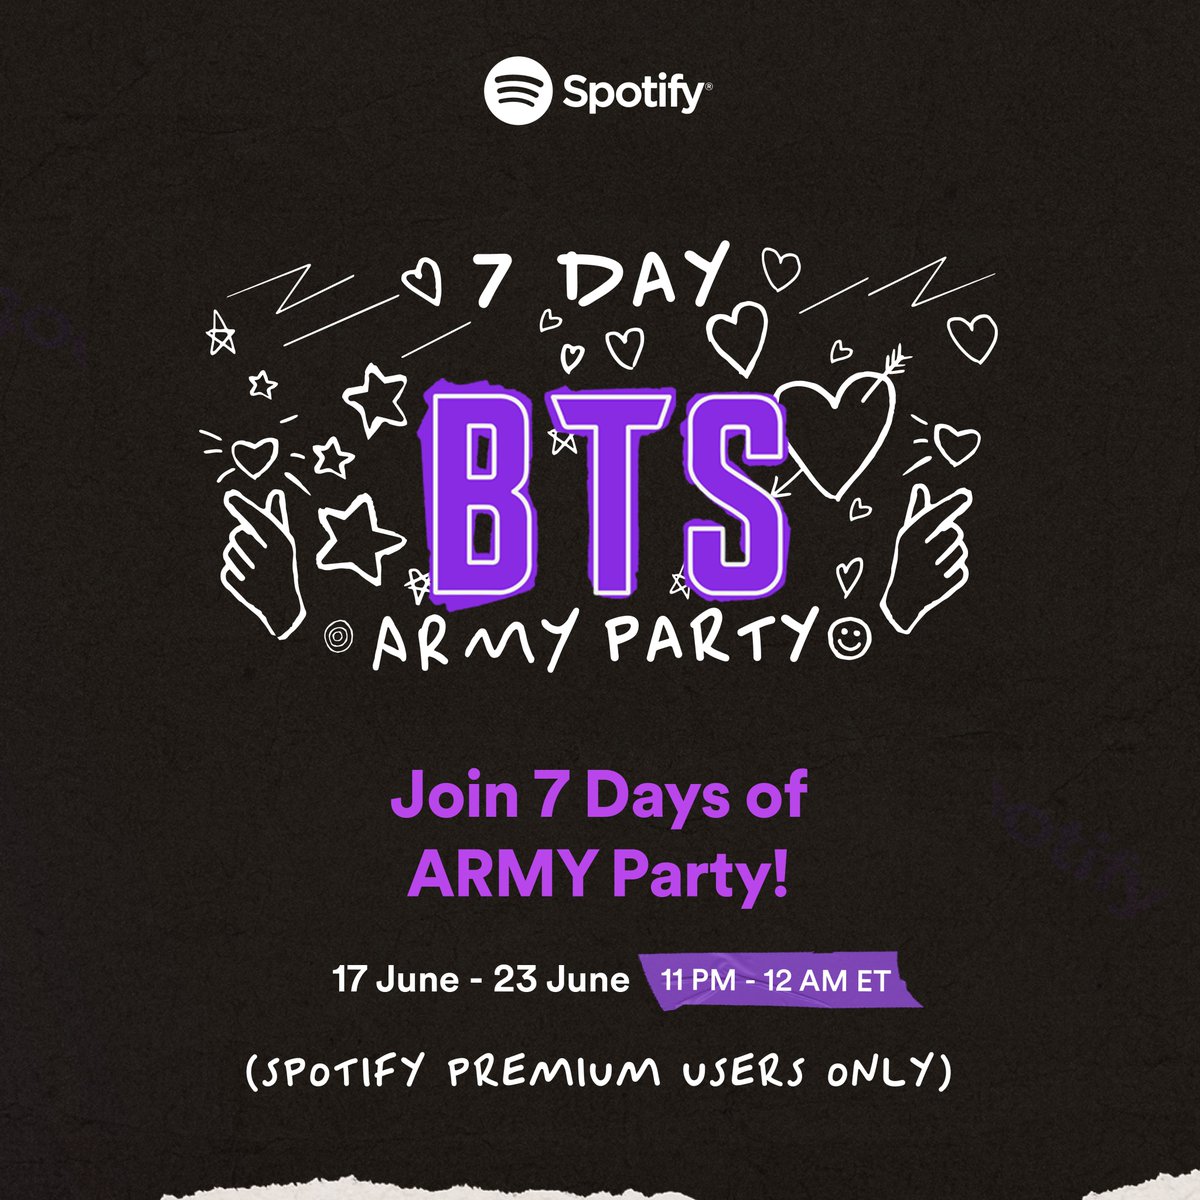 It’s official, ARMY. Proof era just got more exciting with our #7DayARMYParty 💜 Listen to a new, curated BTS playlist everyday from June 17-23 on 7dayarmyparty.byspotify.com 

#7DayARMYParty #SpotifyPurpleU #SpotifyxBTS